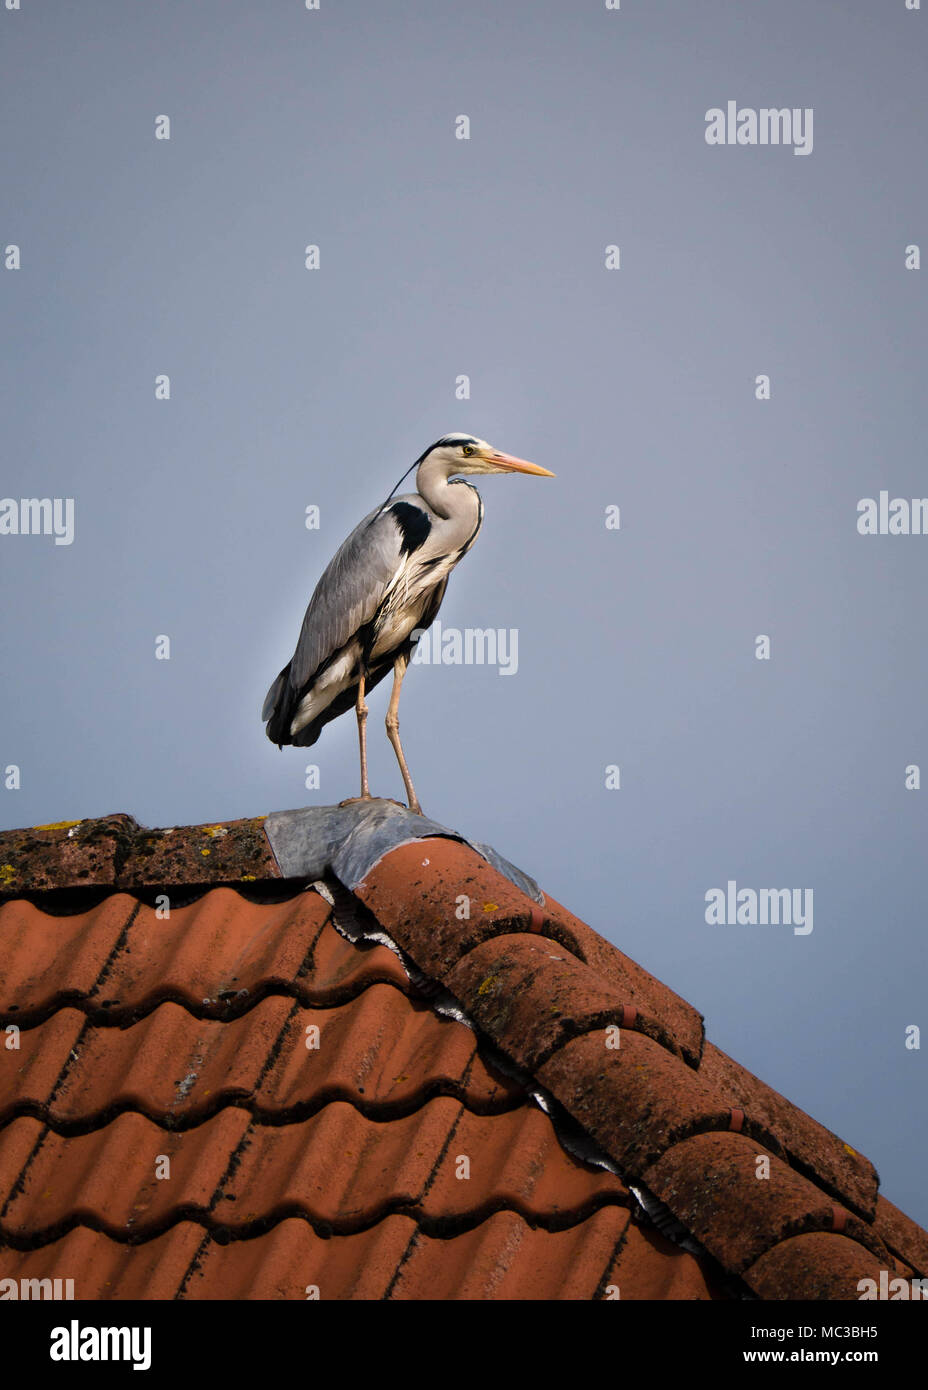 Grey heron standing on a red tiled roof overlooking the area Stock Photo